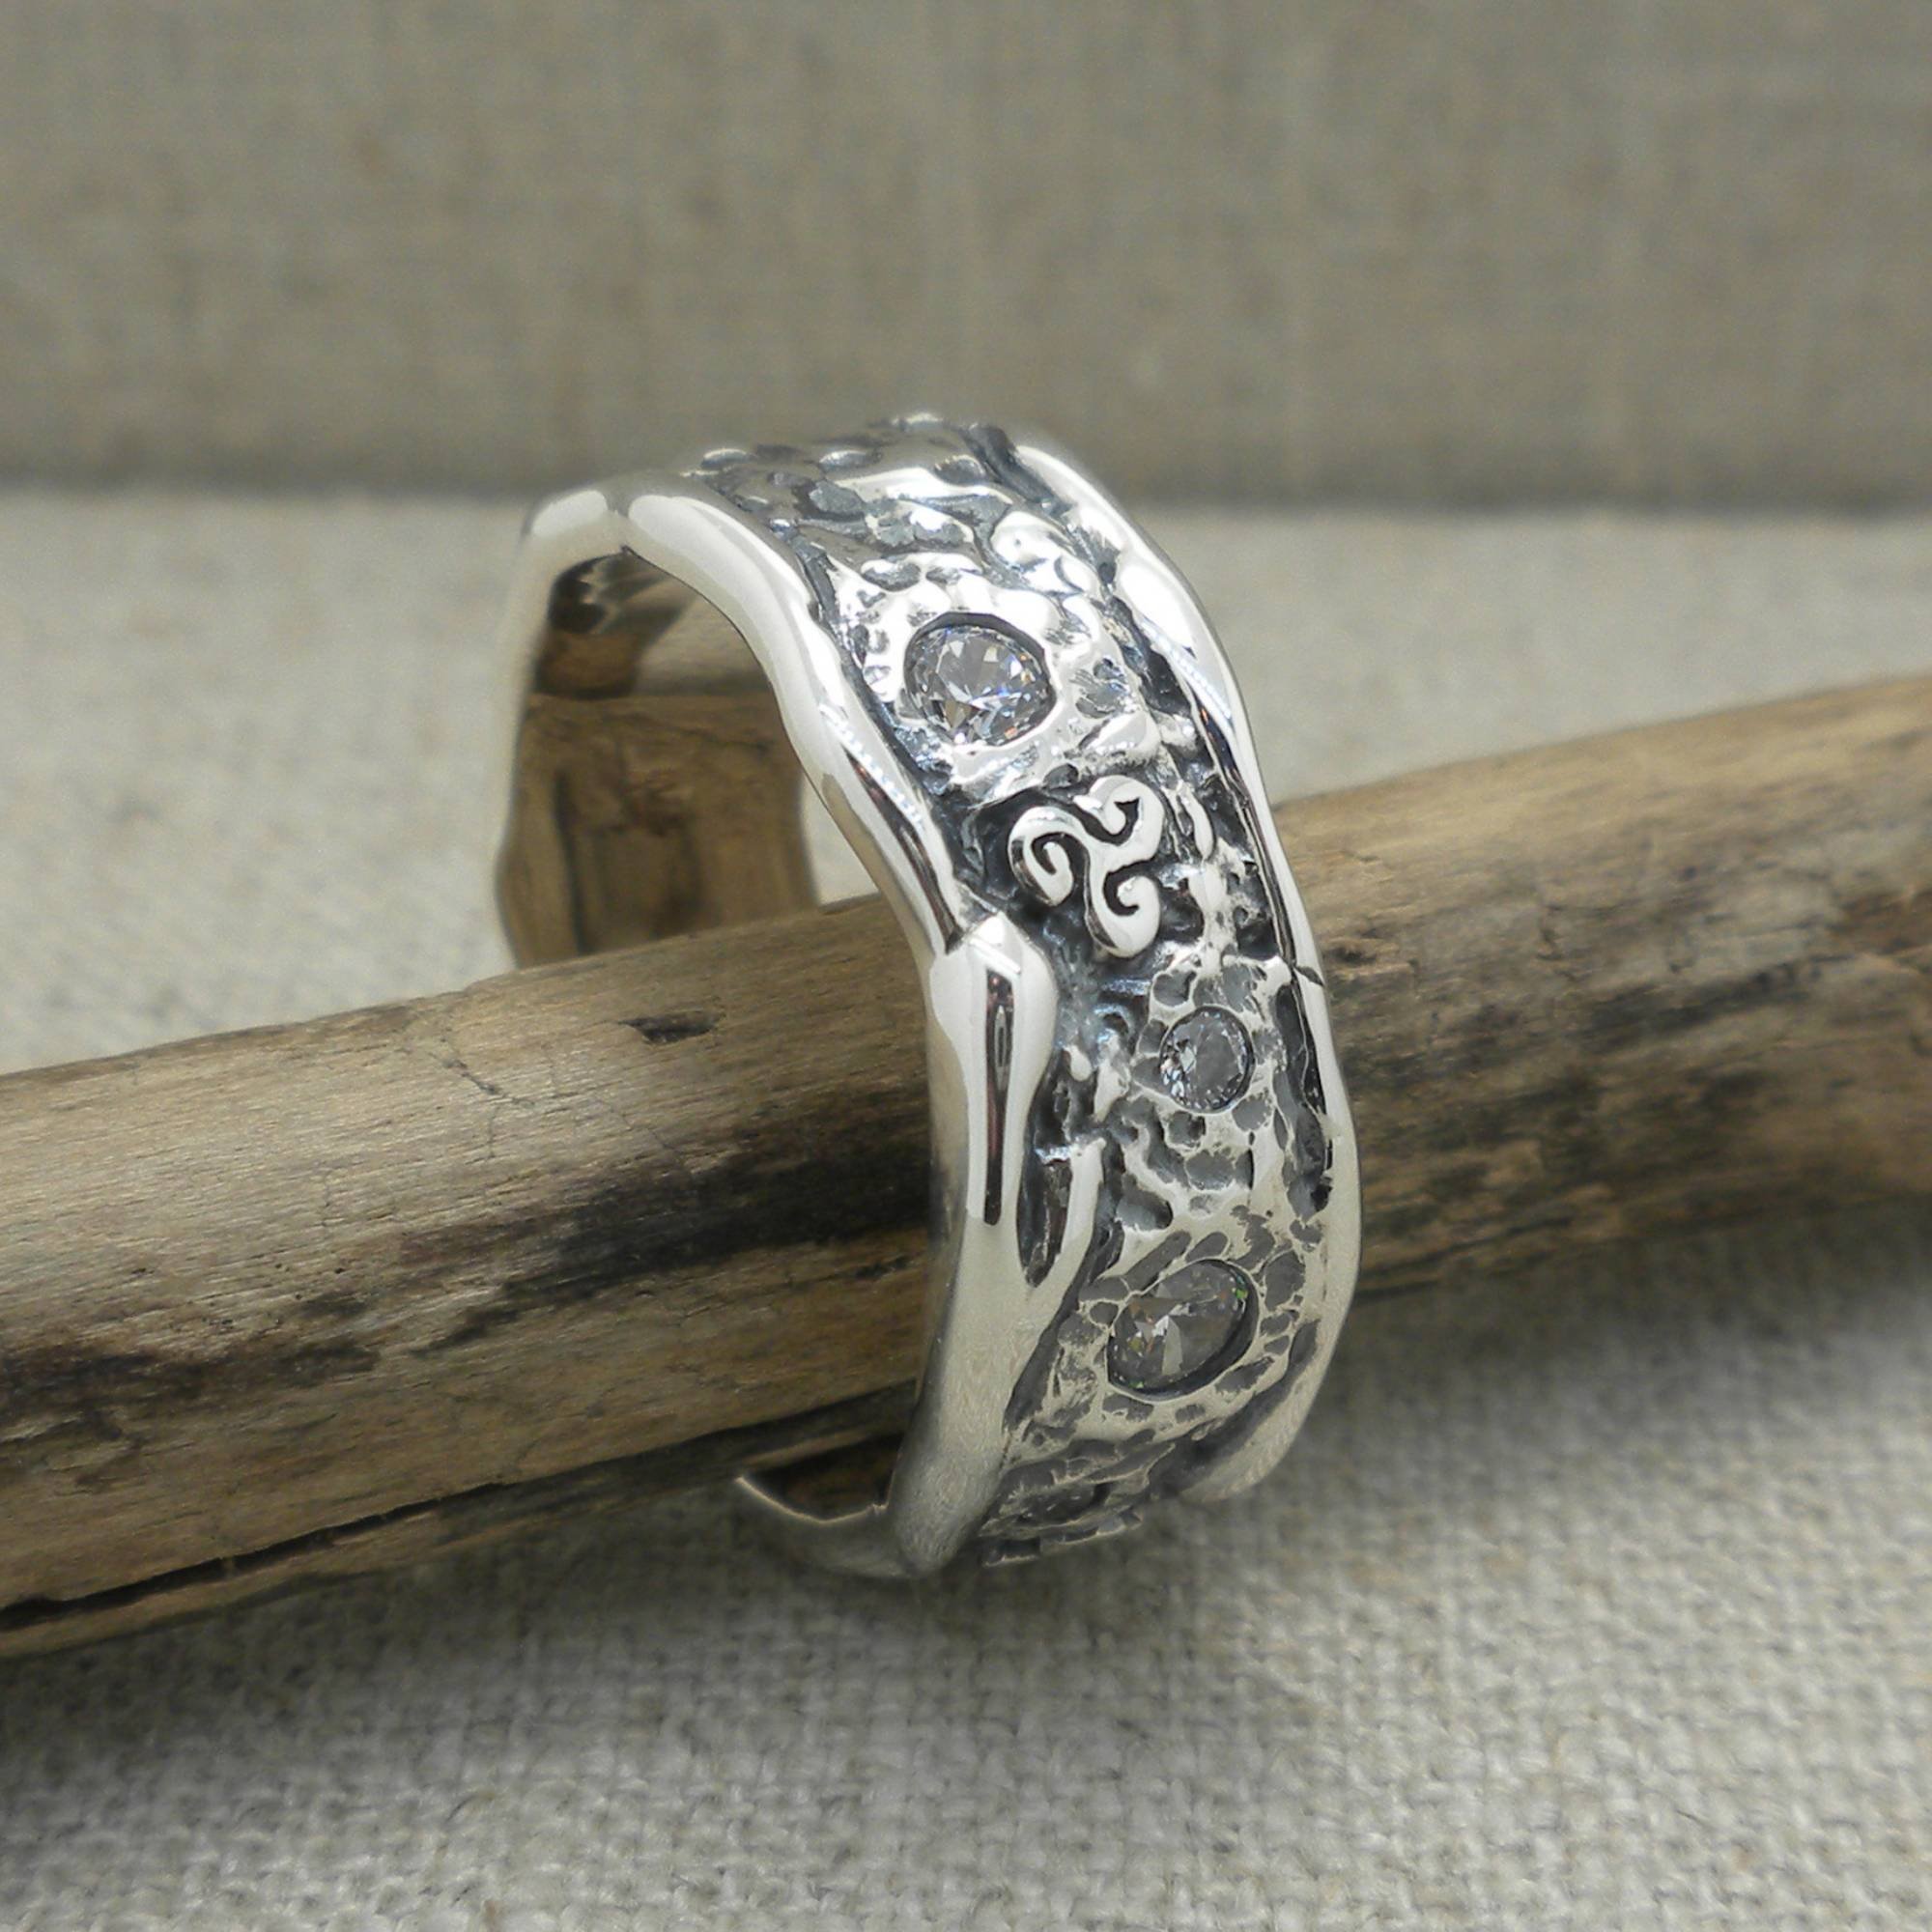 9 mm Wide Sterling Silver with CZs Rocks 'N Rivers Spiral Wedding Ring